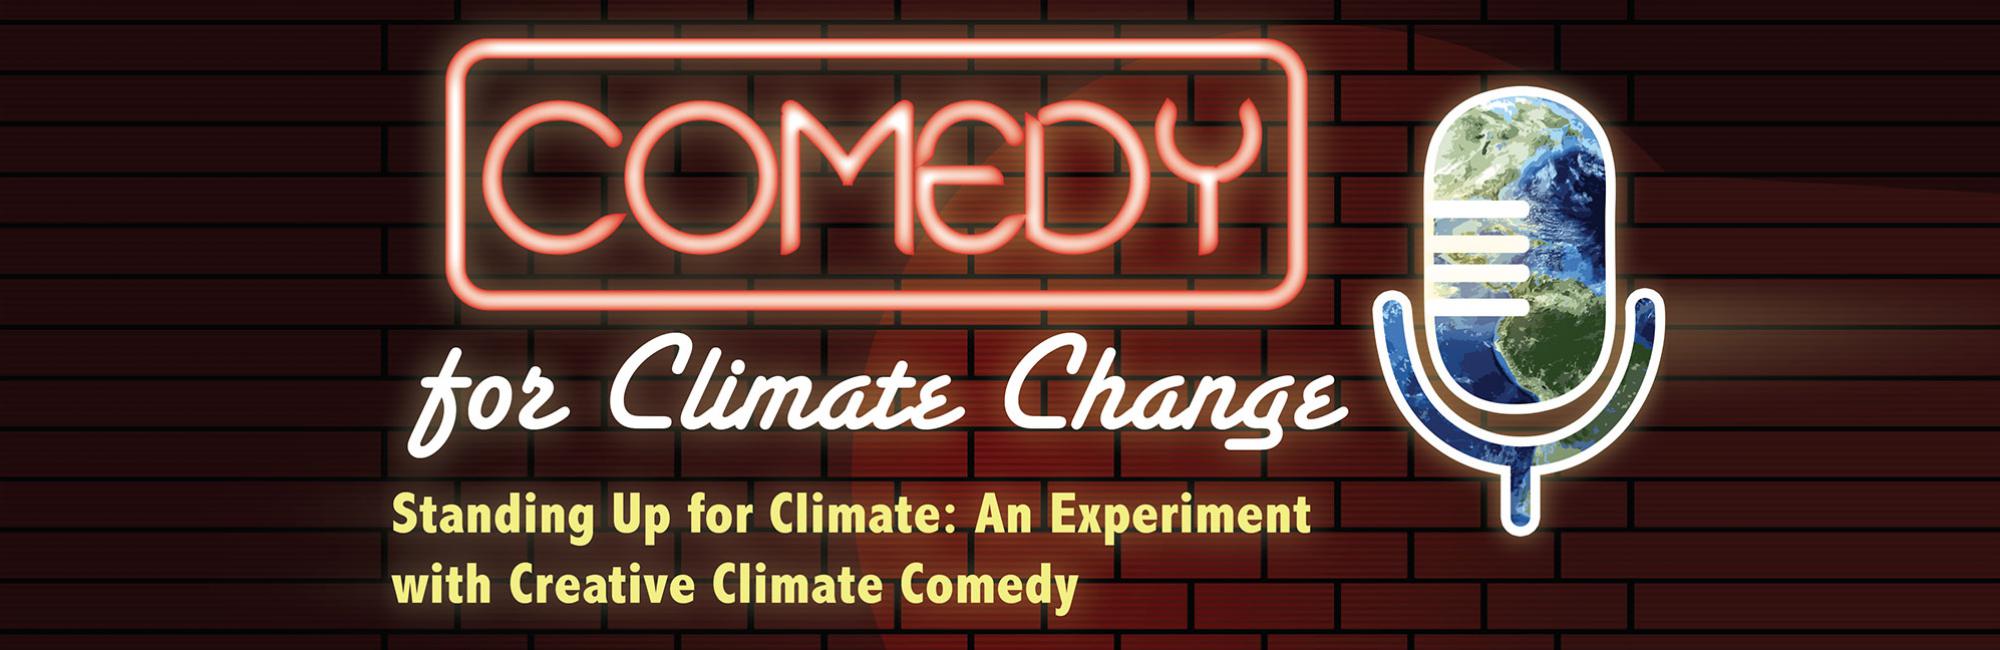 Comedy for Climate Change